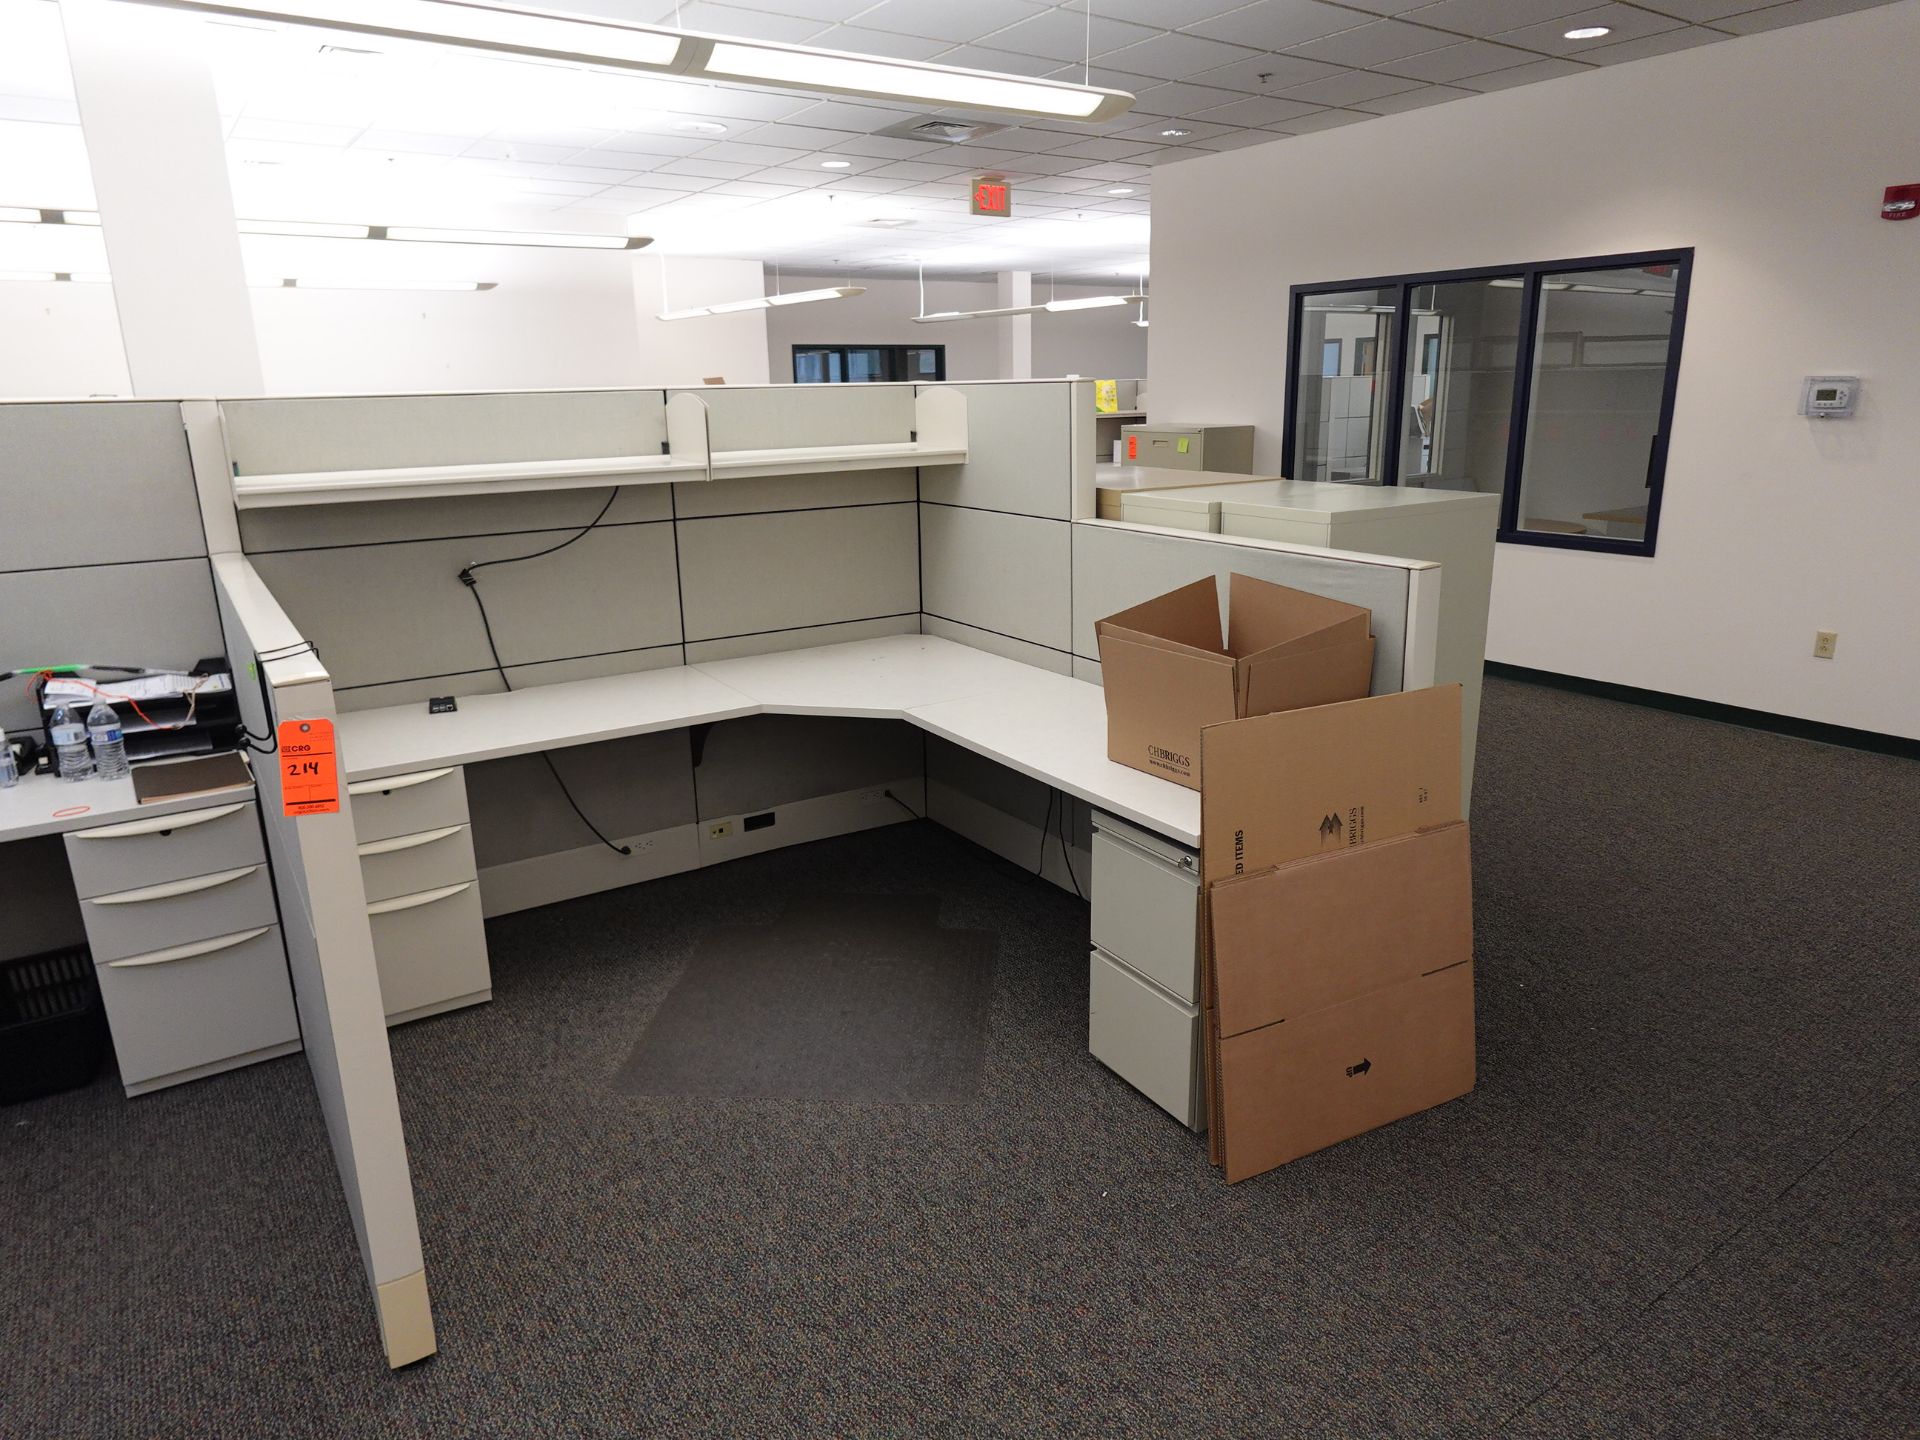 Haworth Office Cubicals - Image 4 of 5